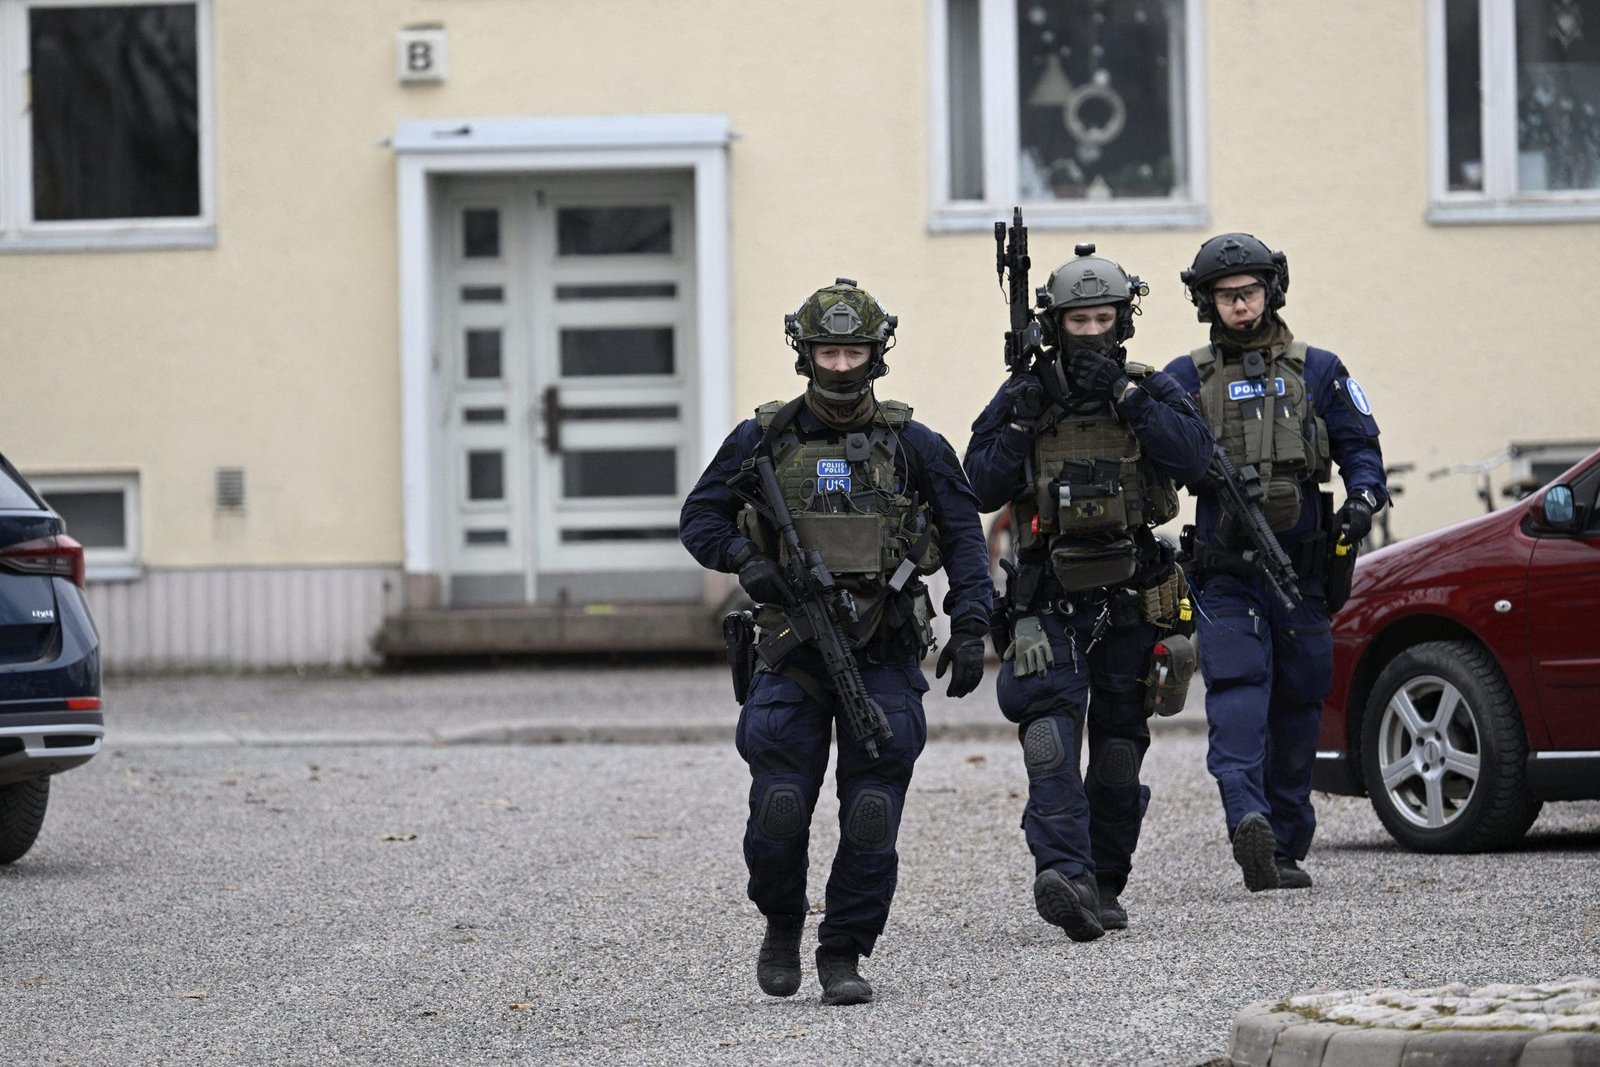 Suspect arrested after school shooting in Finland, multiple wounded